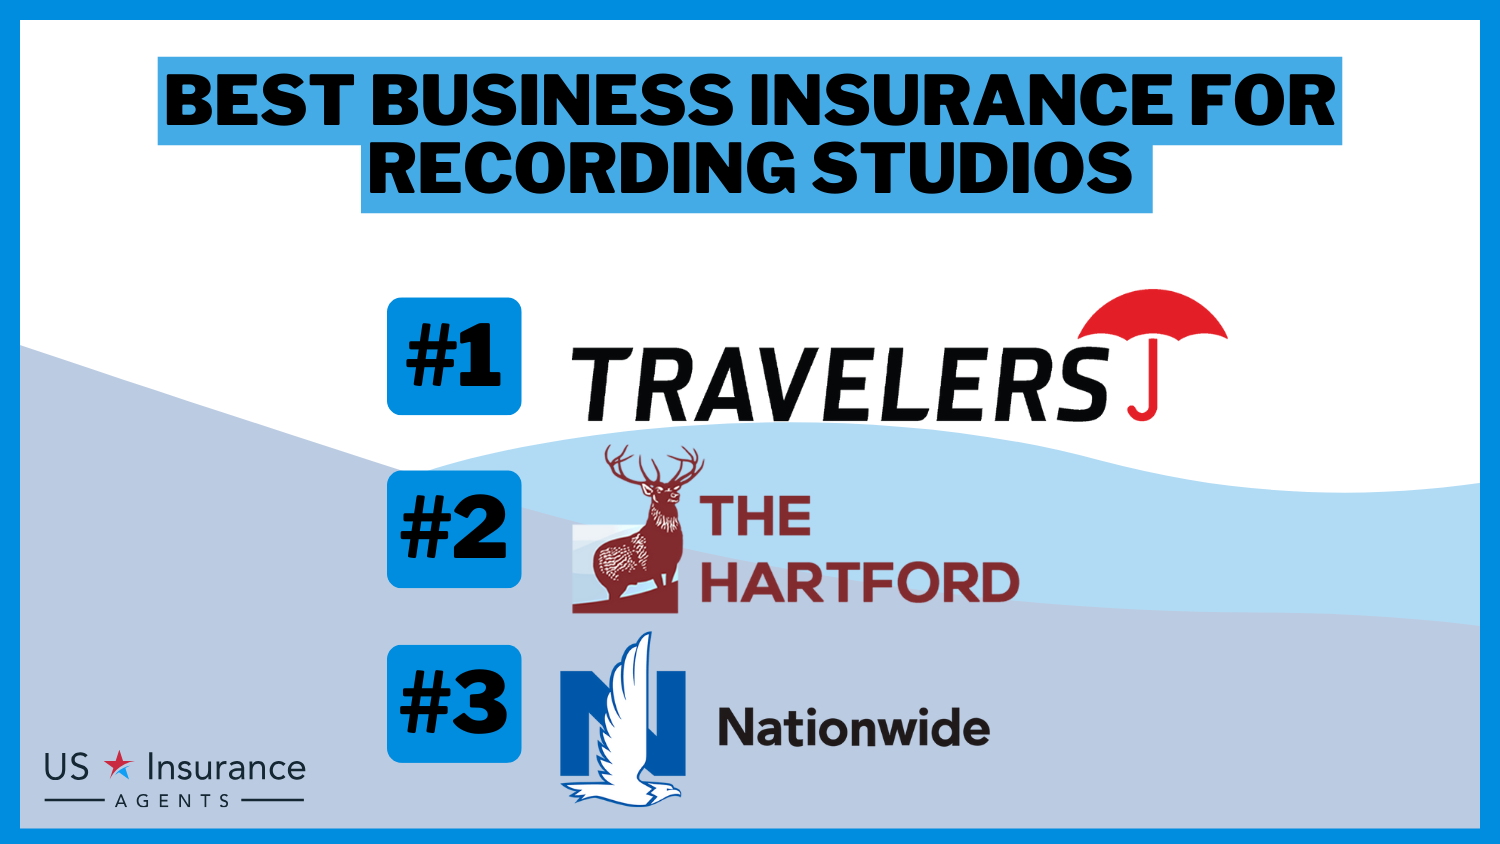 Travelers, The Hartford, Nationwide: Best Business Insurance for Recording Studios